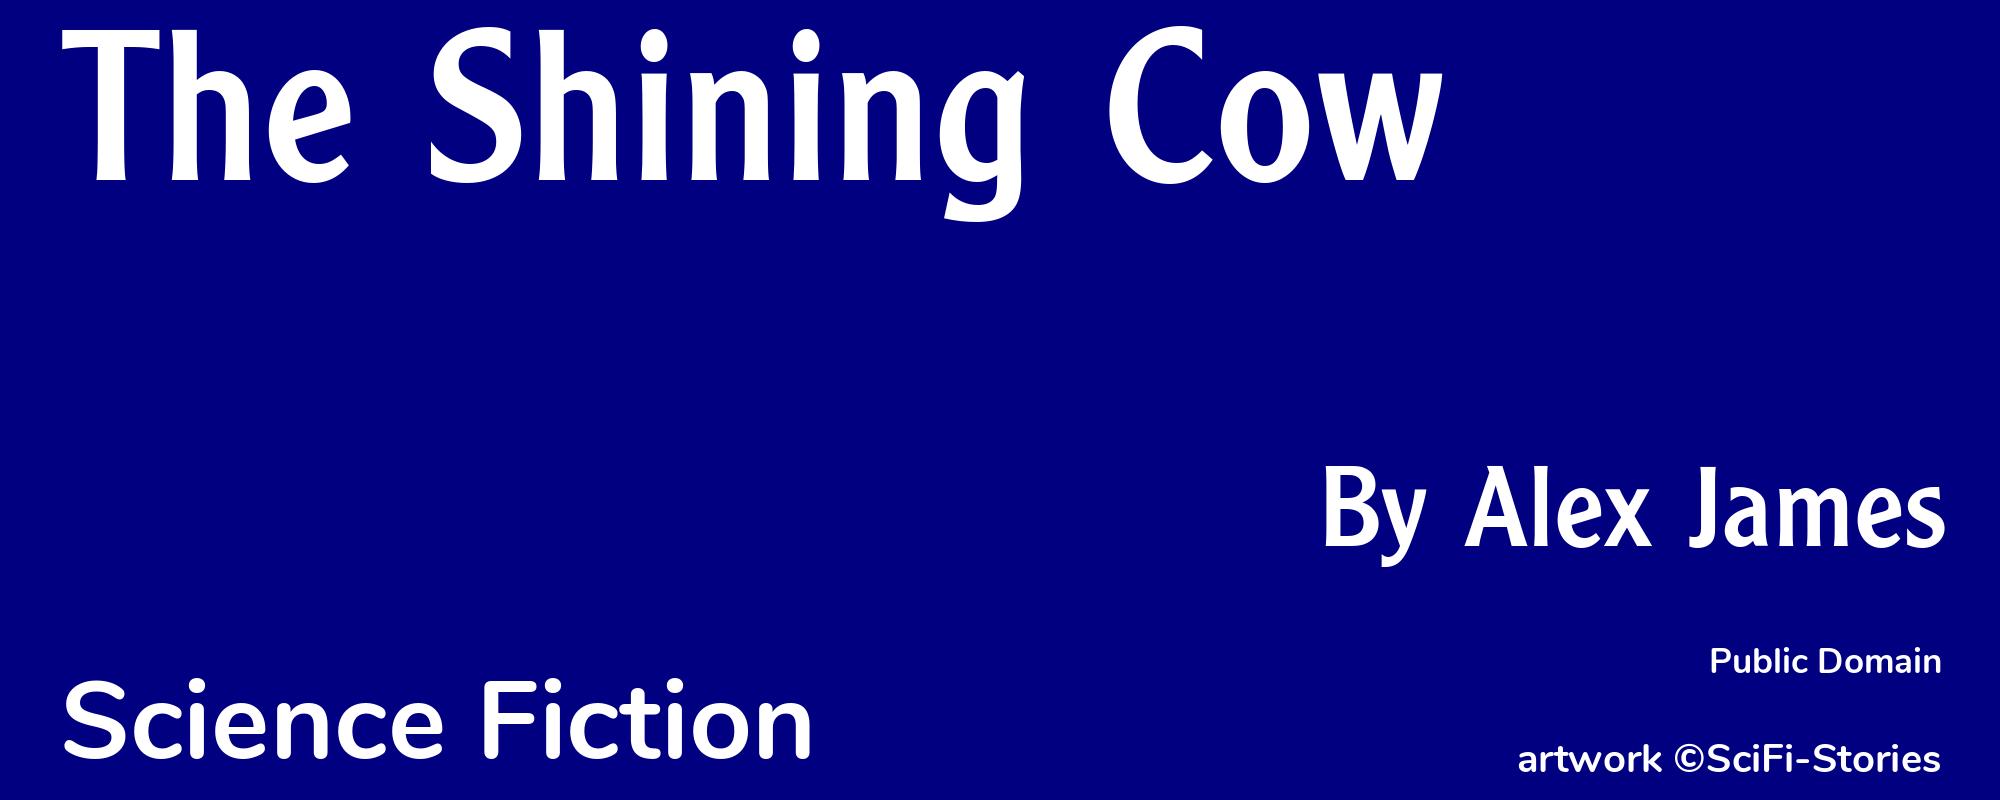 The Shining Cow - Cover